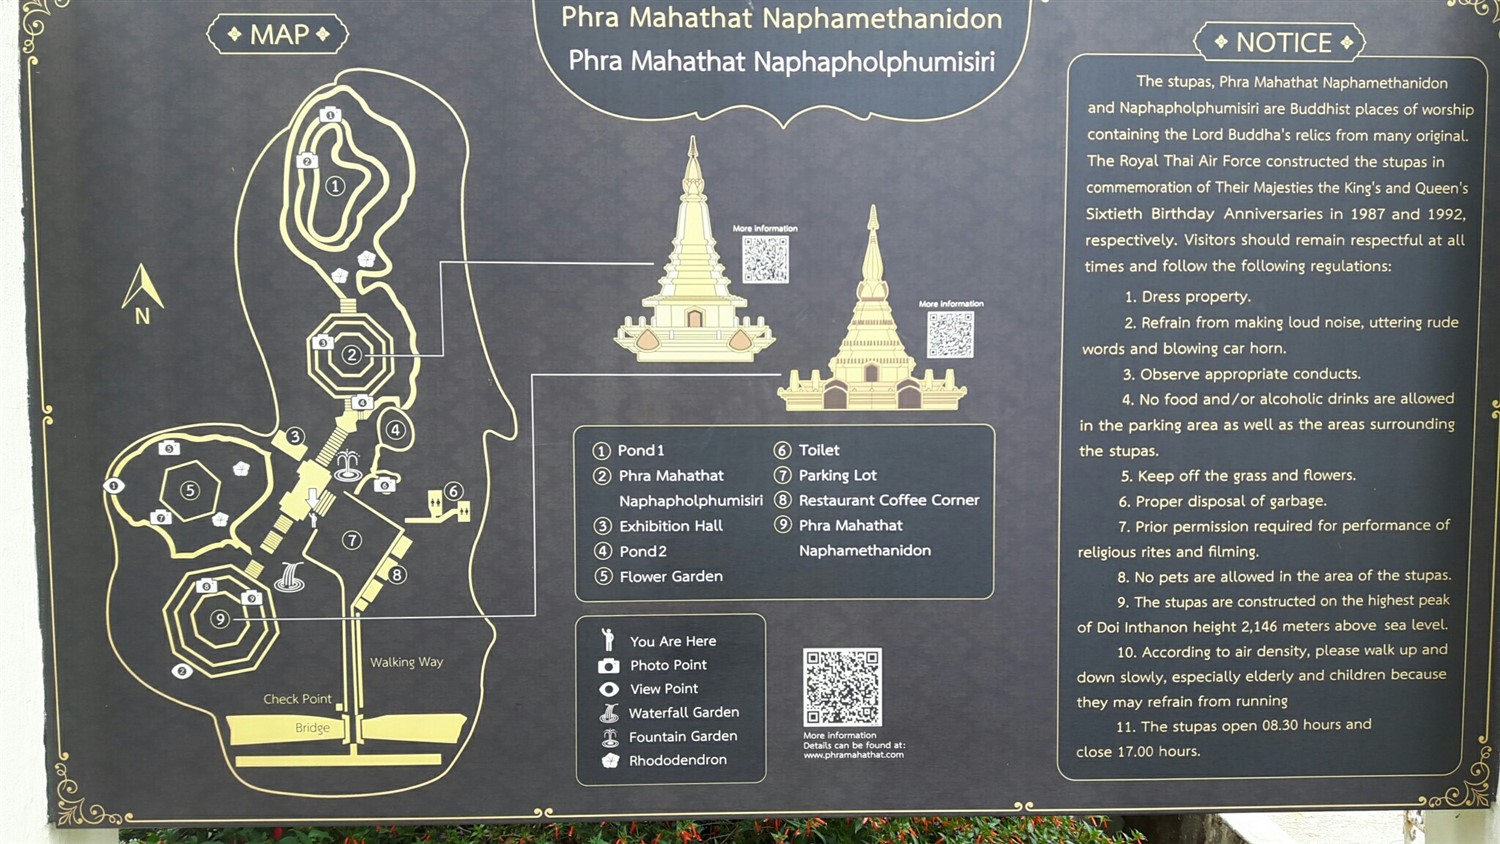 Day 2 - One Day Trip To Doi Inthanon National Park : Chiang Mai, Thailand (Apr'17) 21